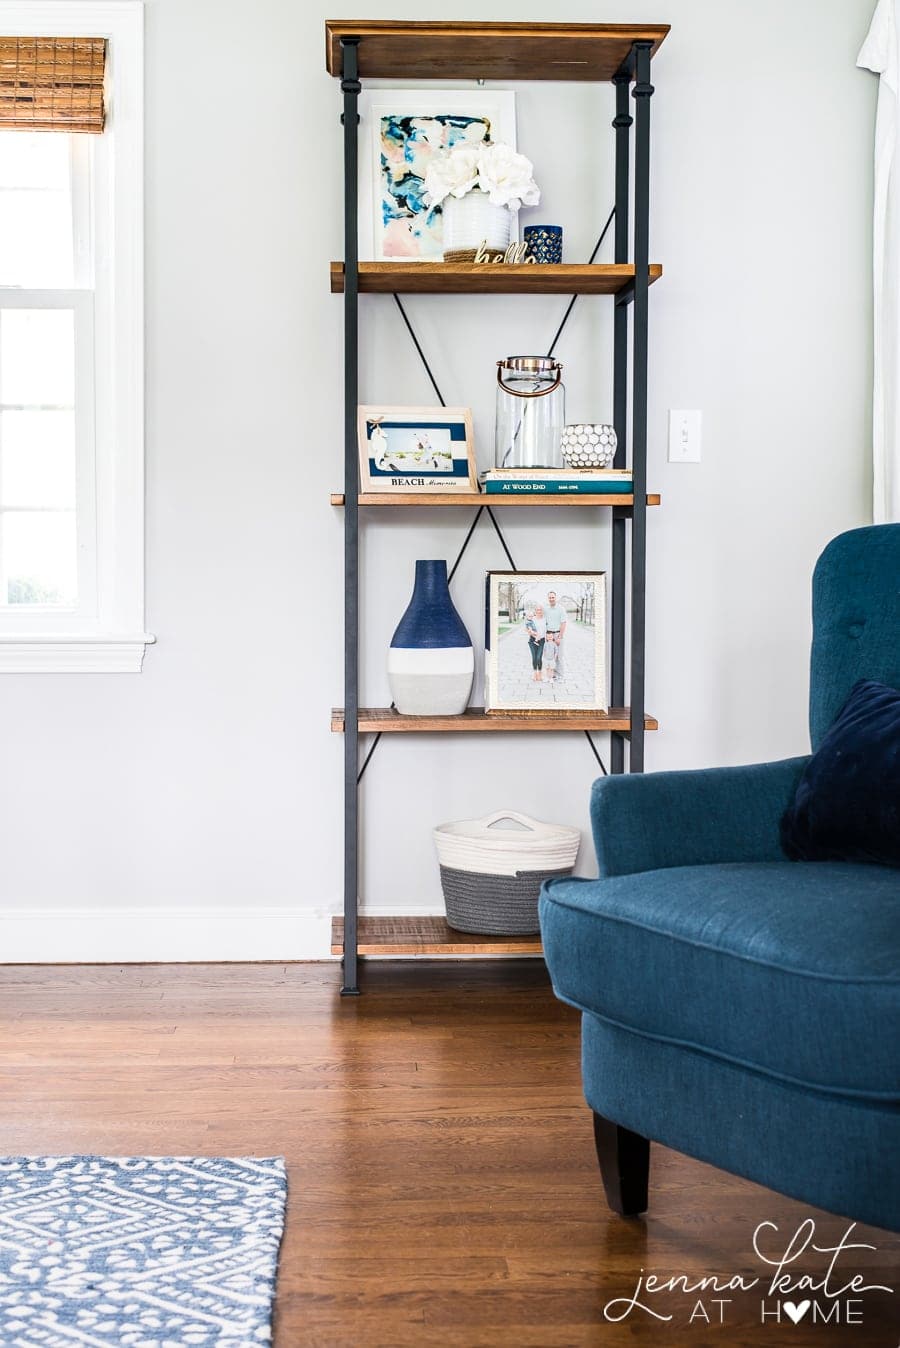 The edge of a tall, dark blue armchair, and an industrial -style wooden shelf in the distance, holding various decor items